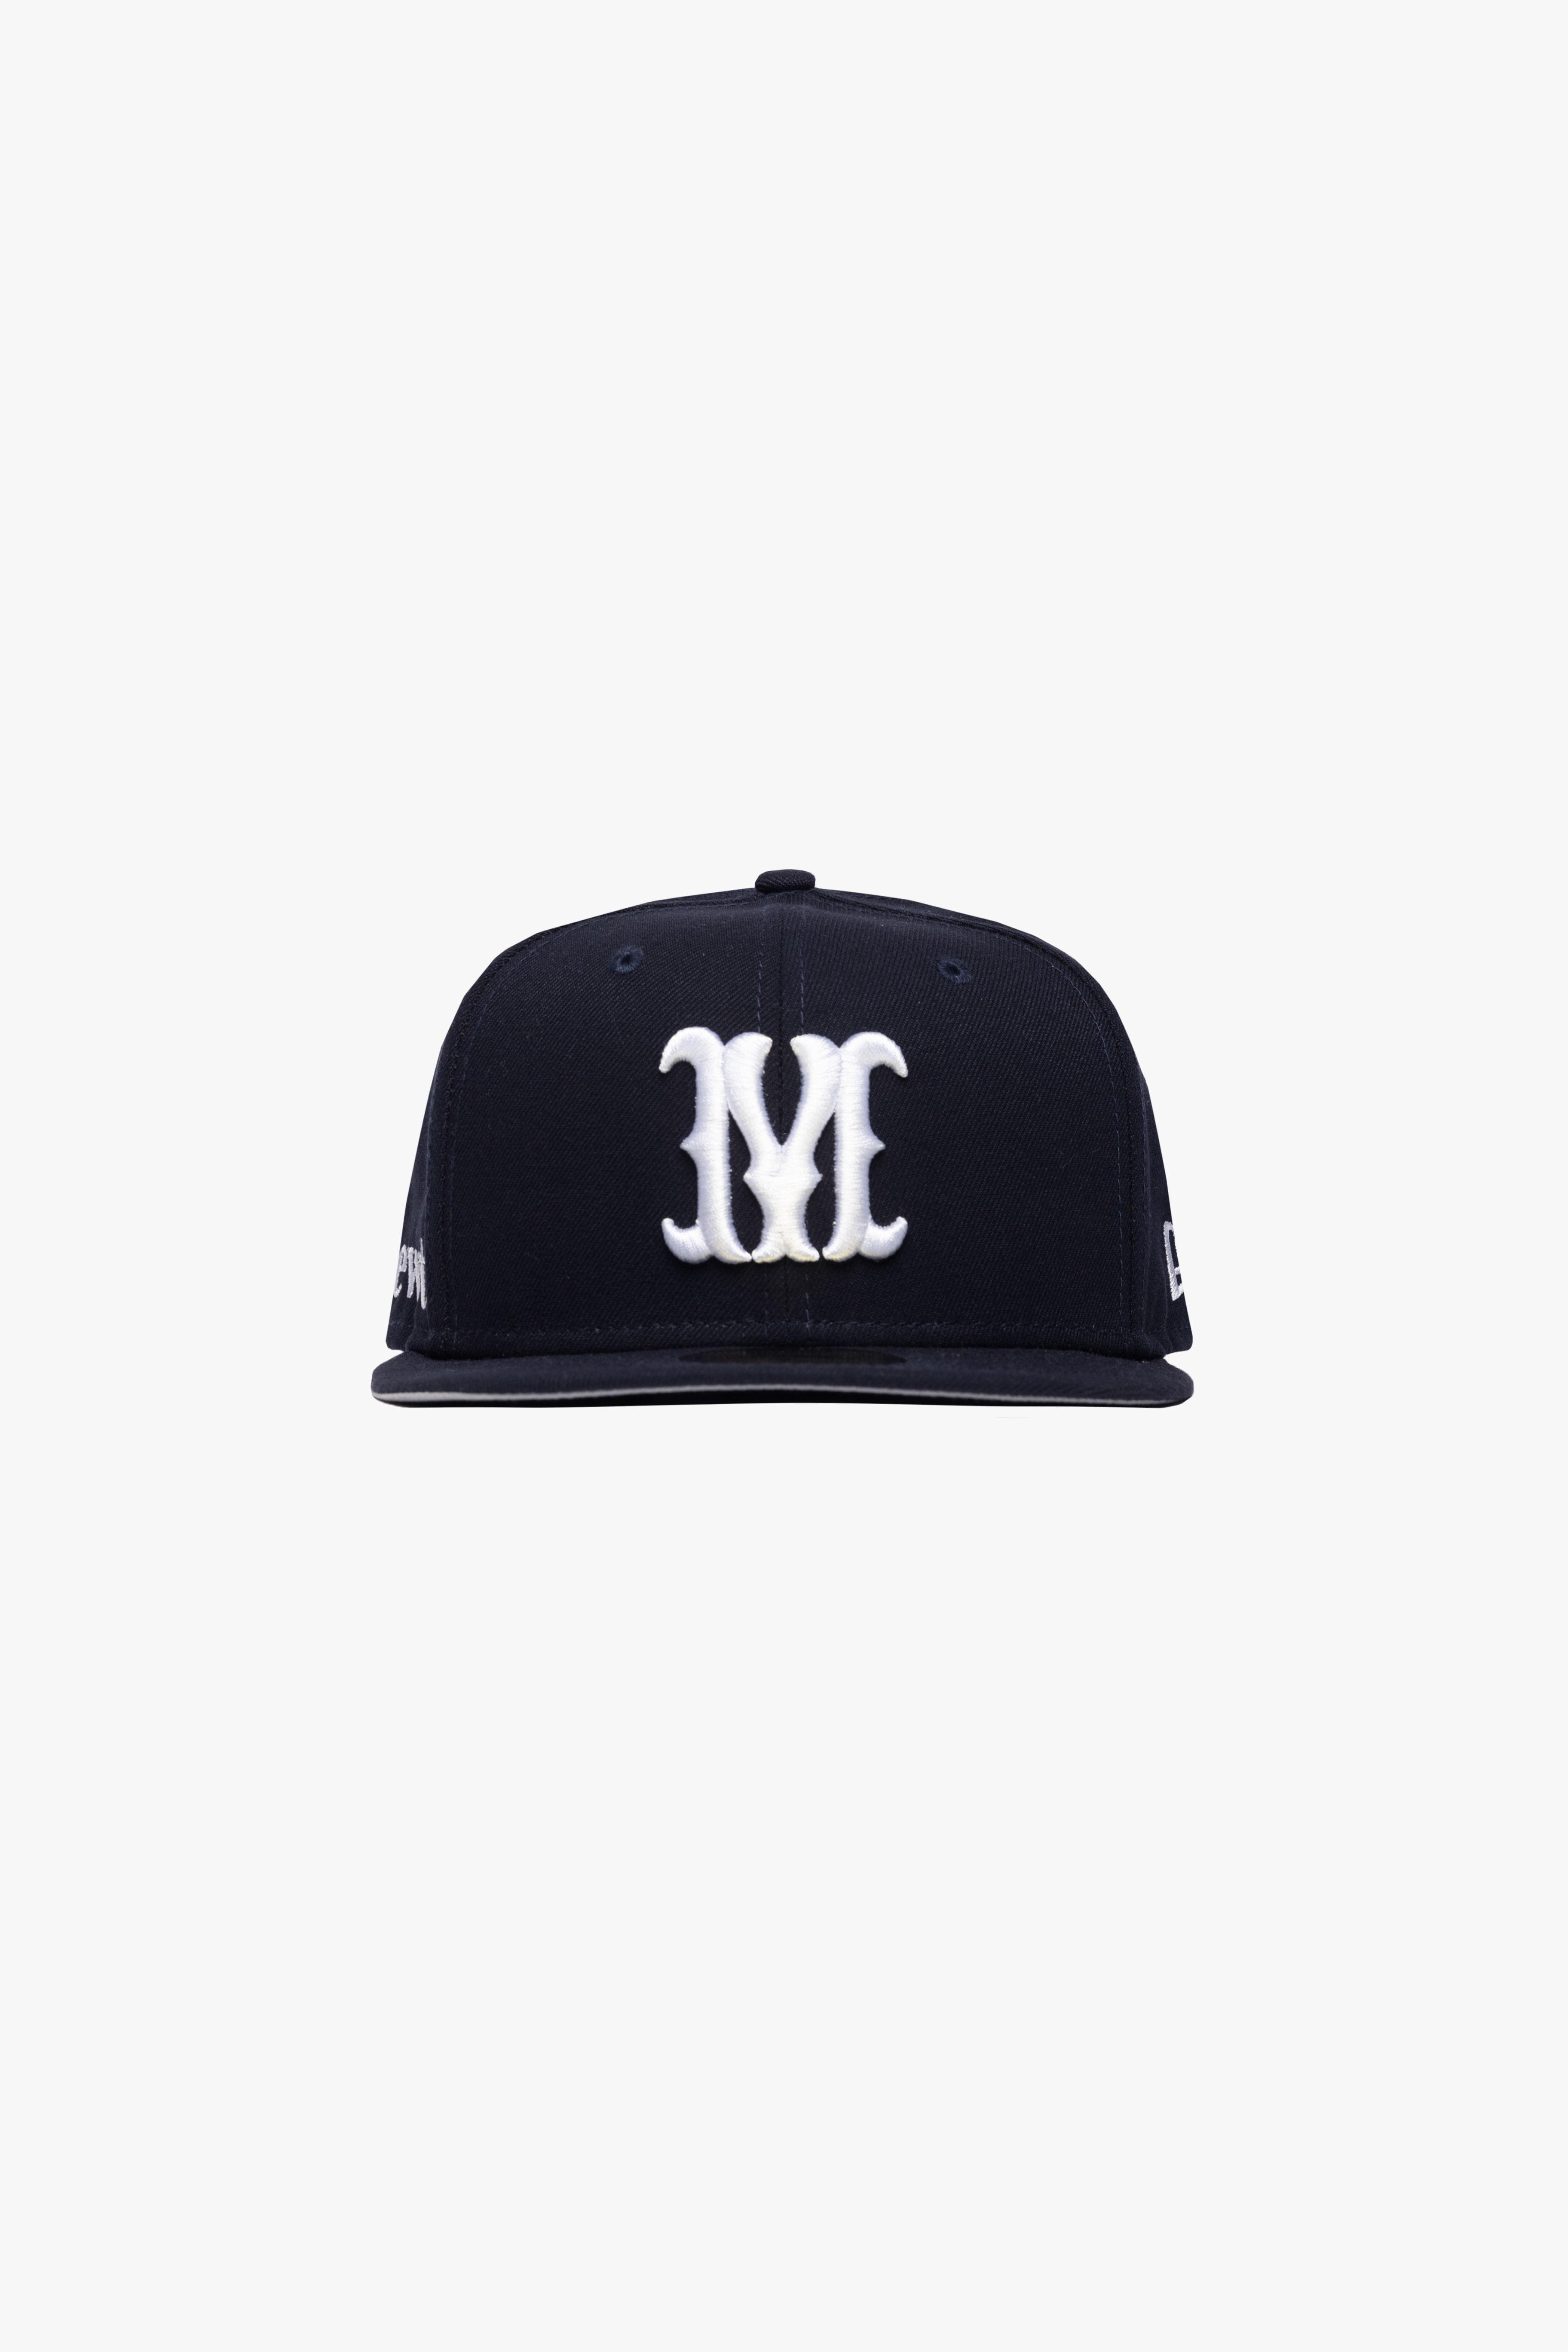 NAVY MEWT NEW ERA 59FIFTY FITTED